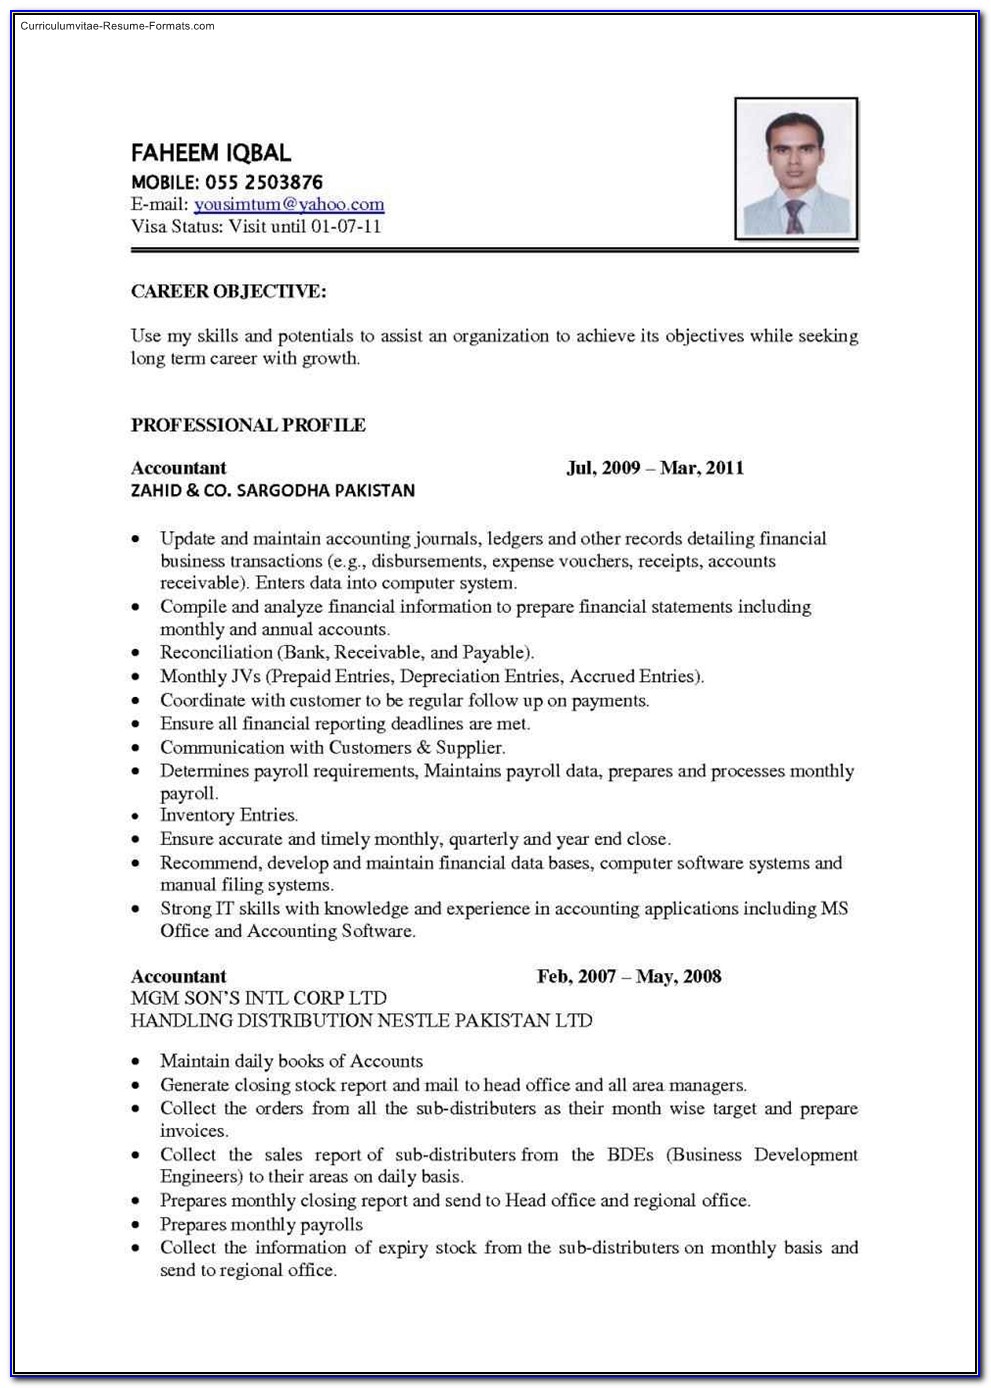 Best Resume Template To Use